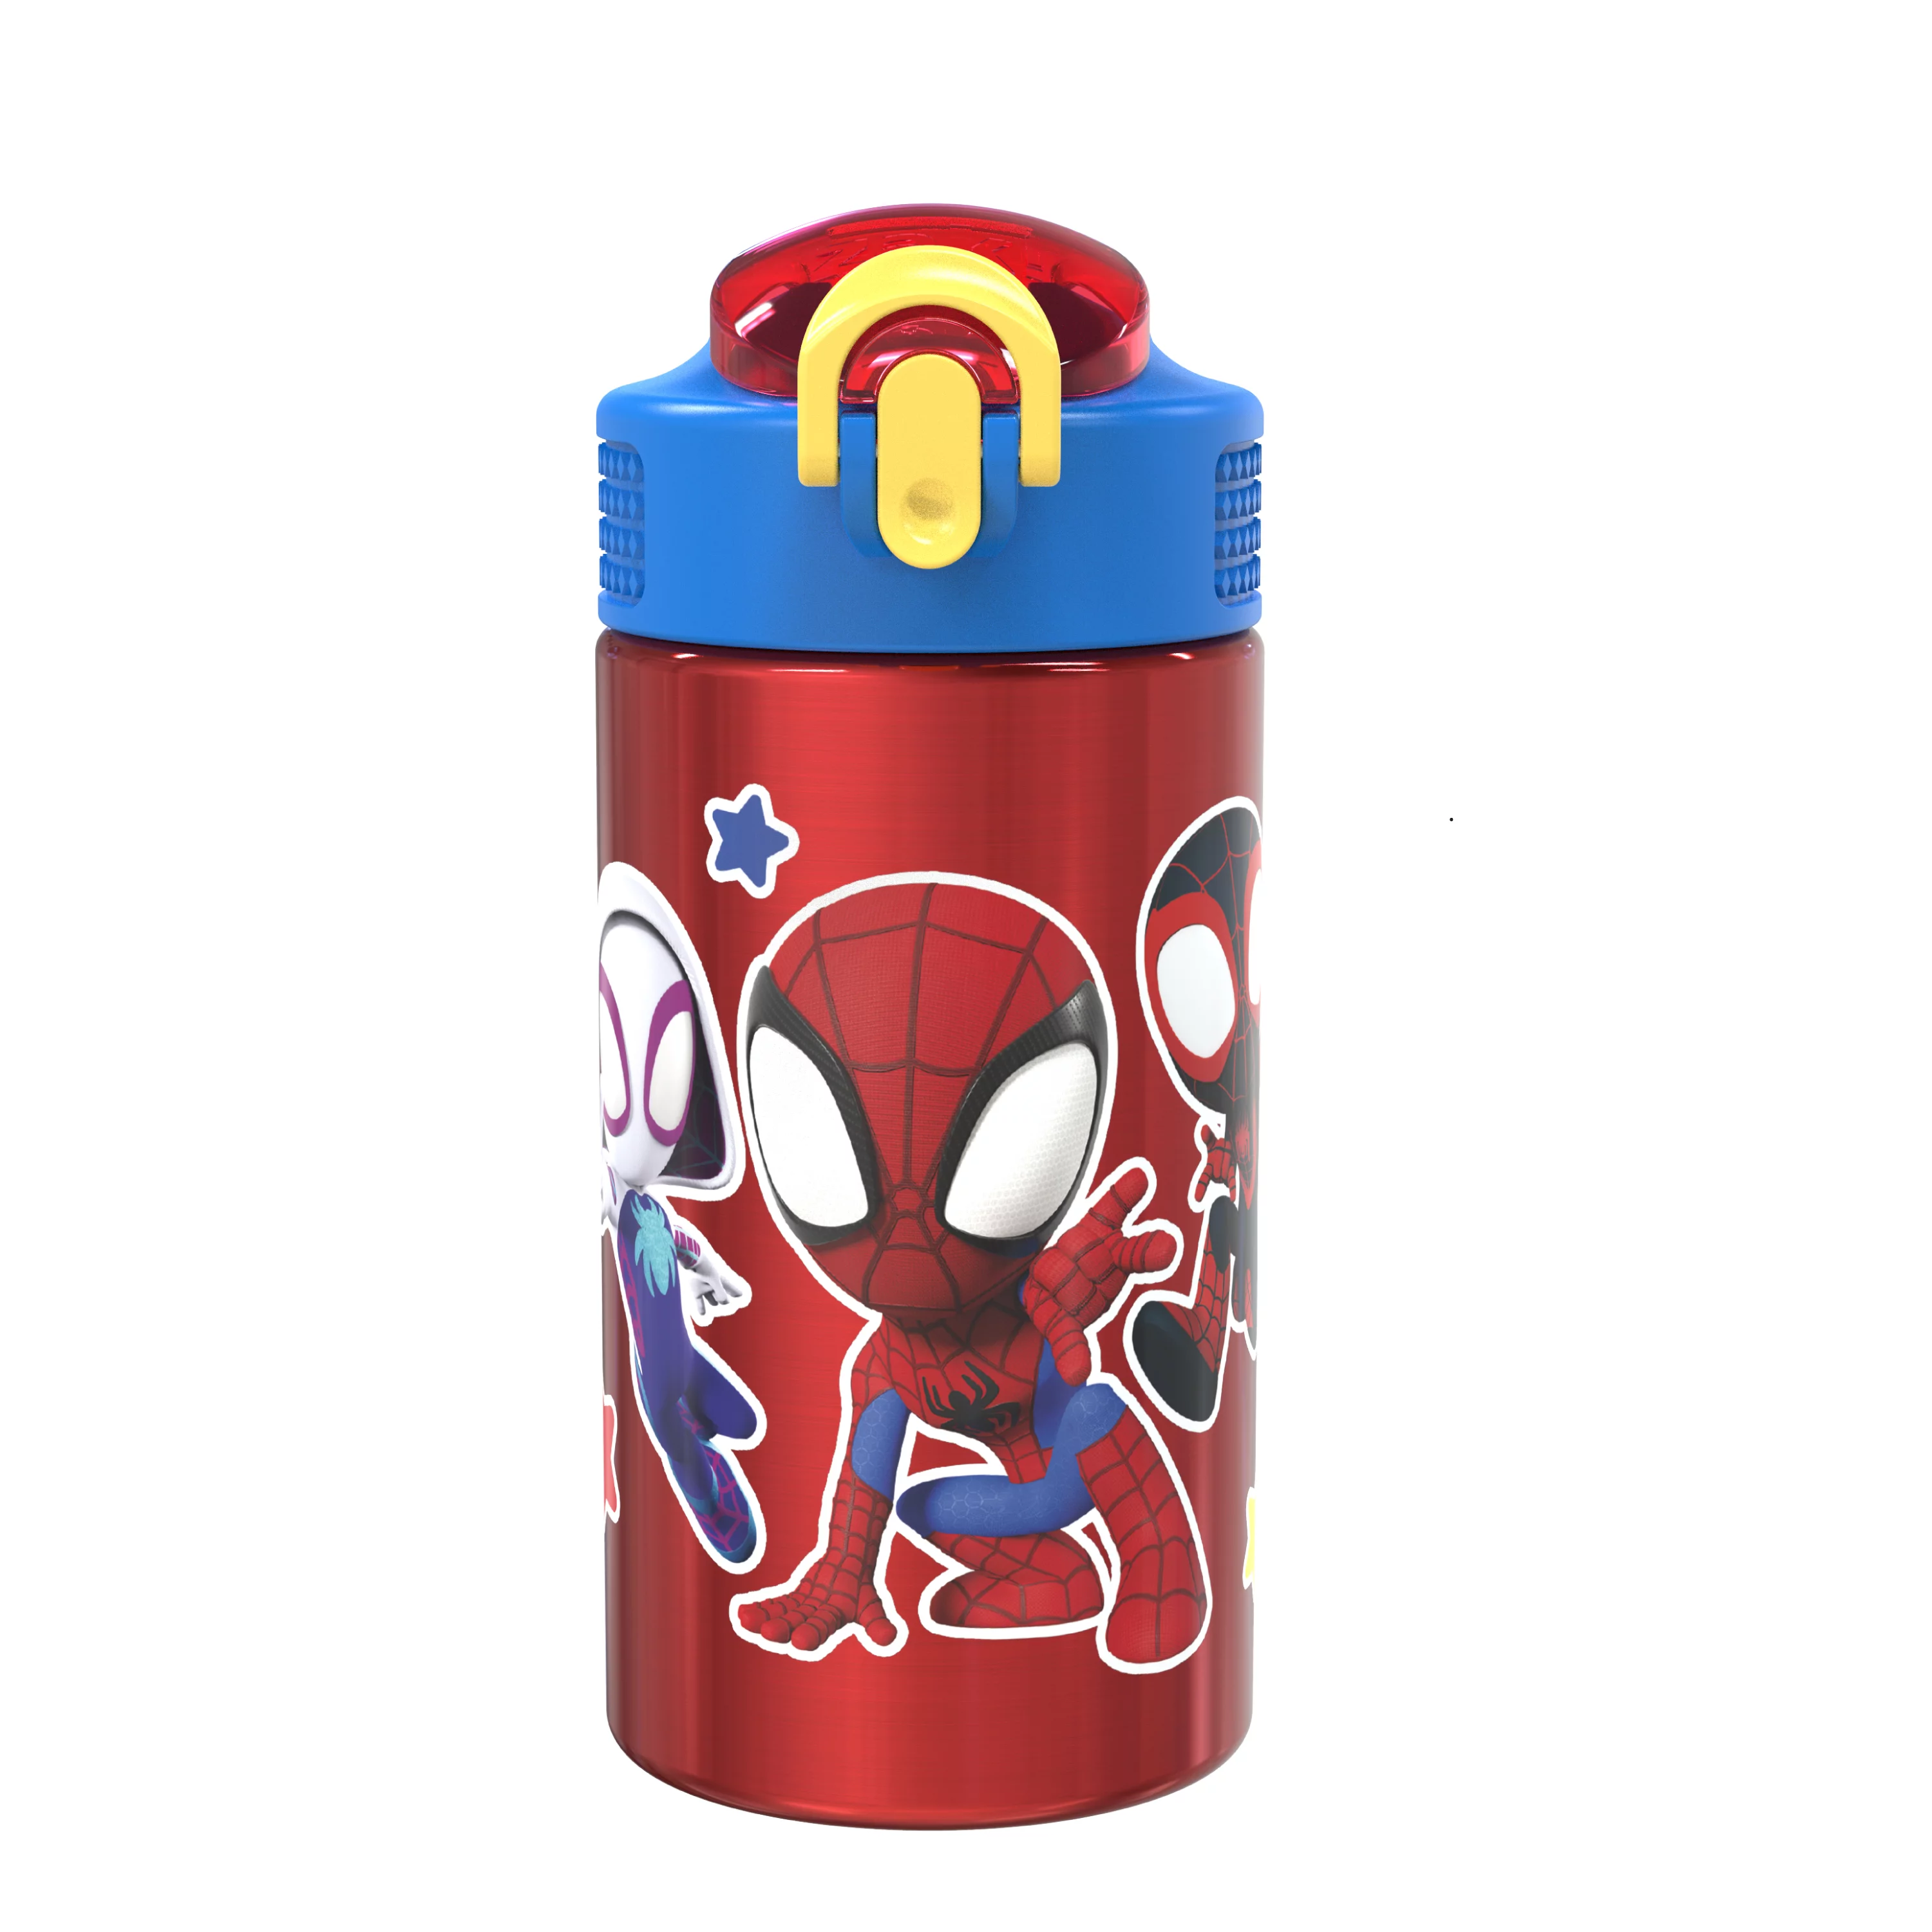 Zak Designs 15.5 oz Kids Water Bottle Stainless Steel with Push-Button Spout and Locking Cover, Marvel Spider-Man